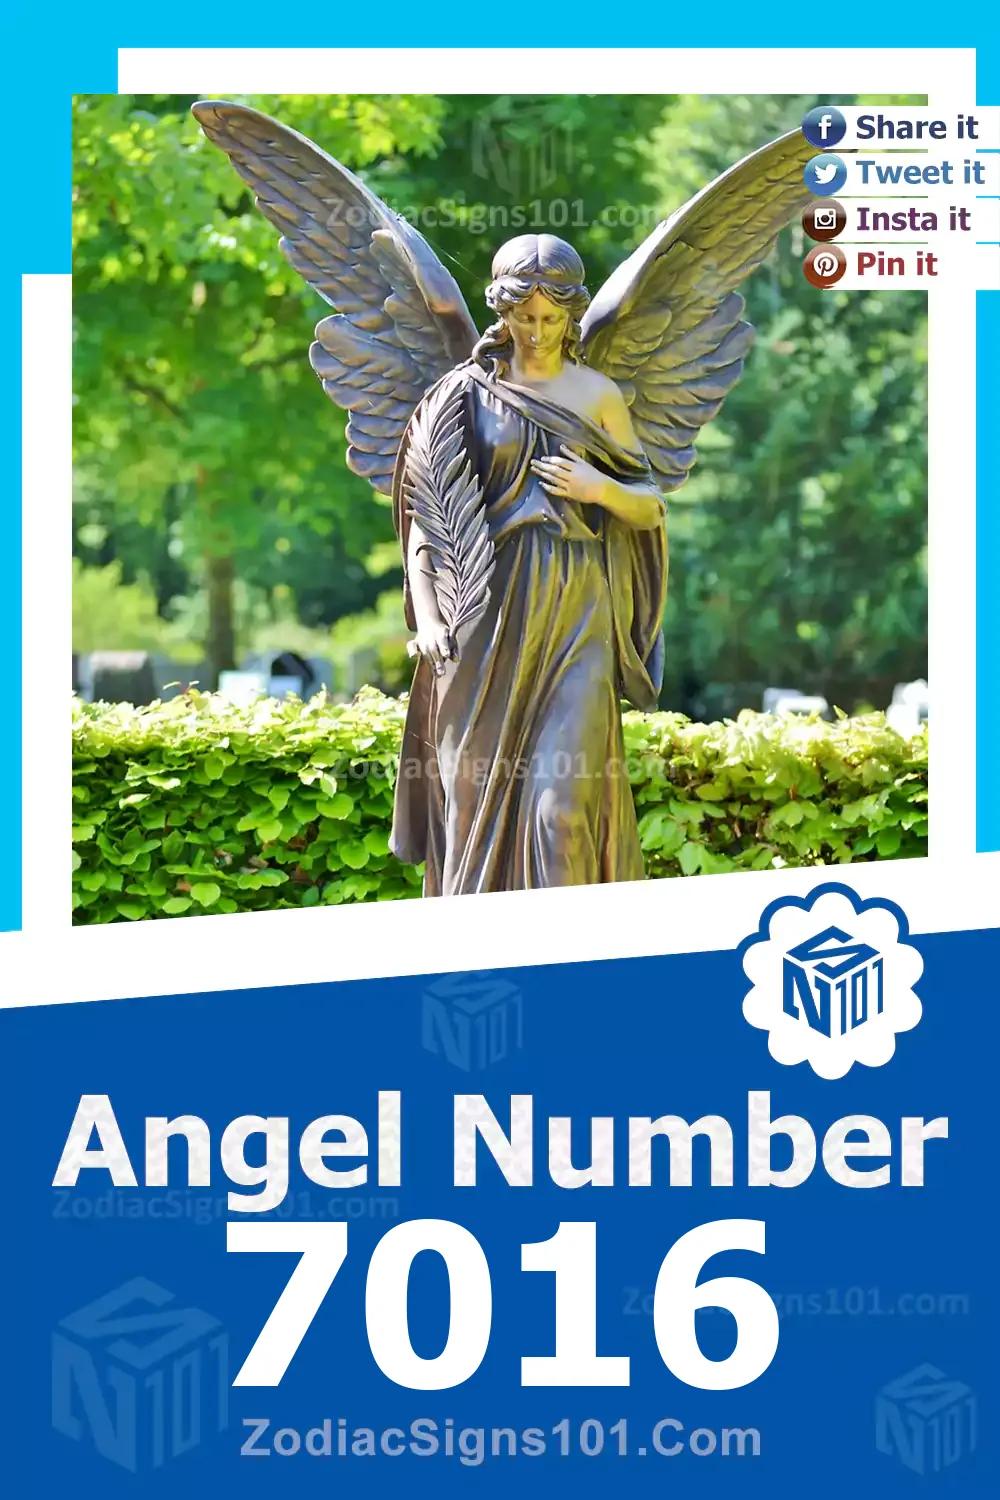 7016 Angel Number Meaning